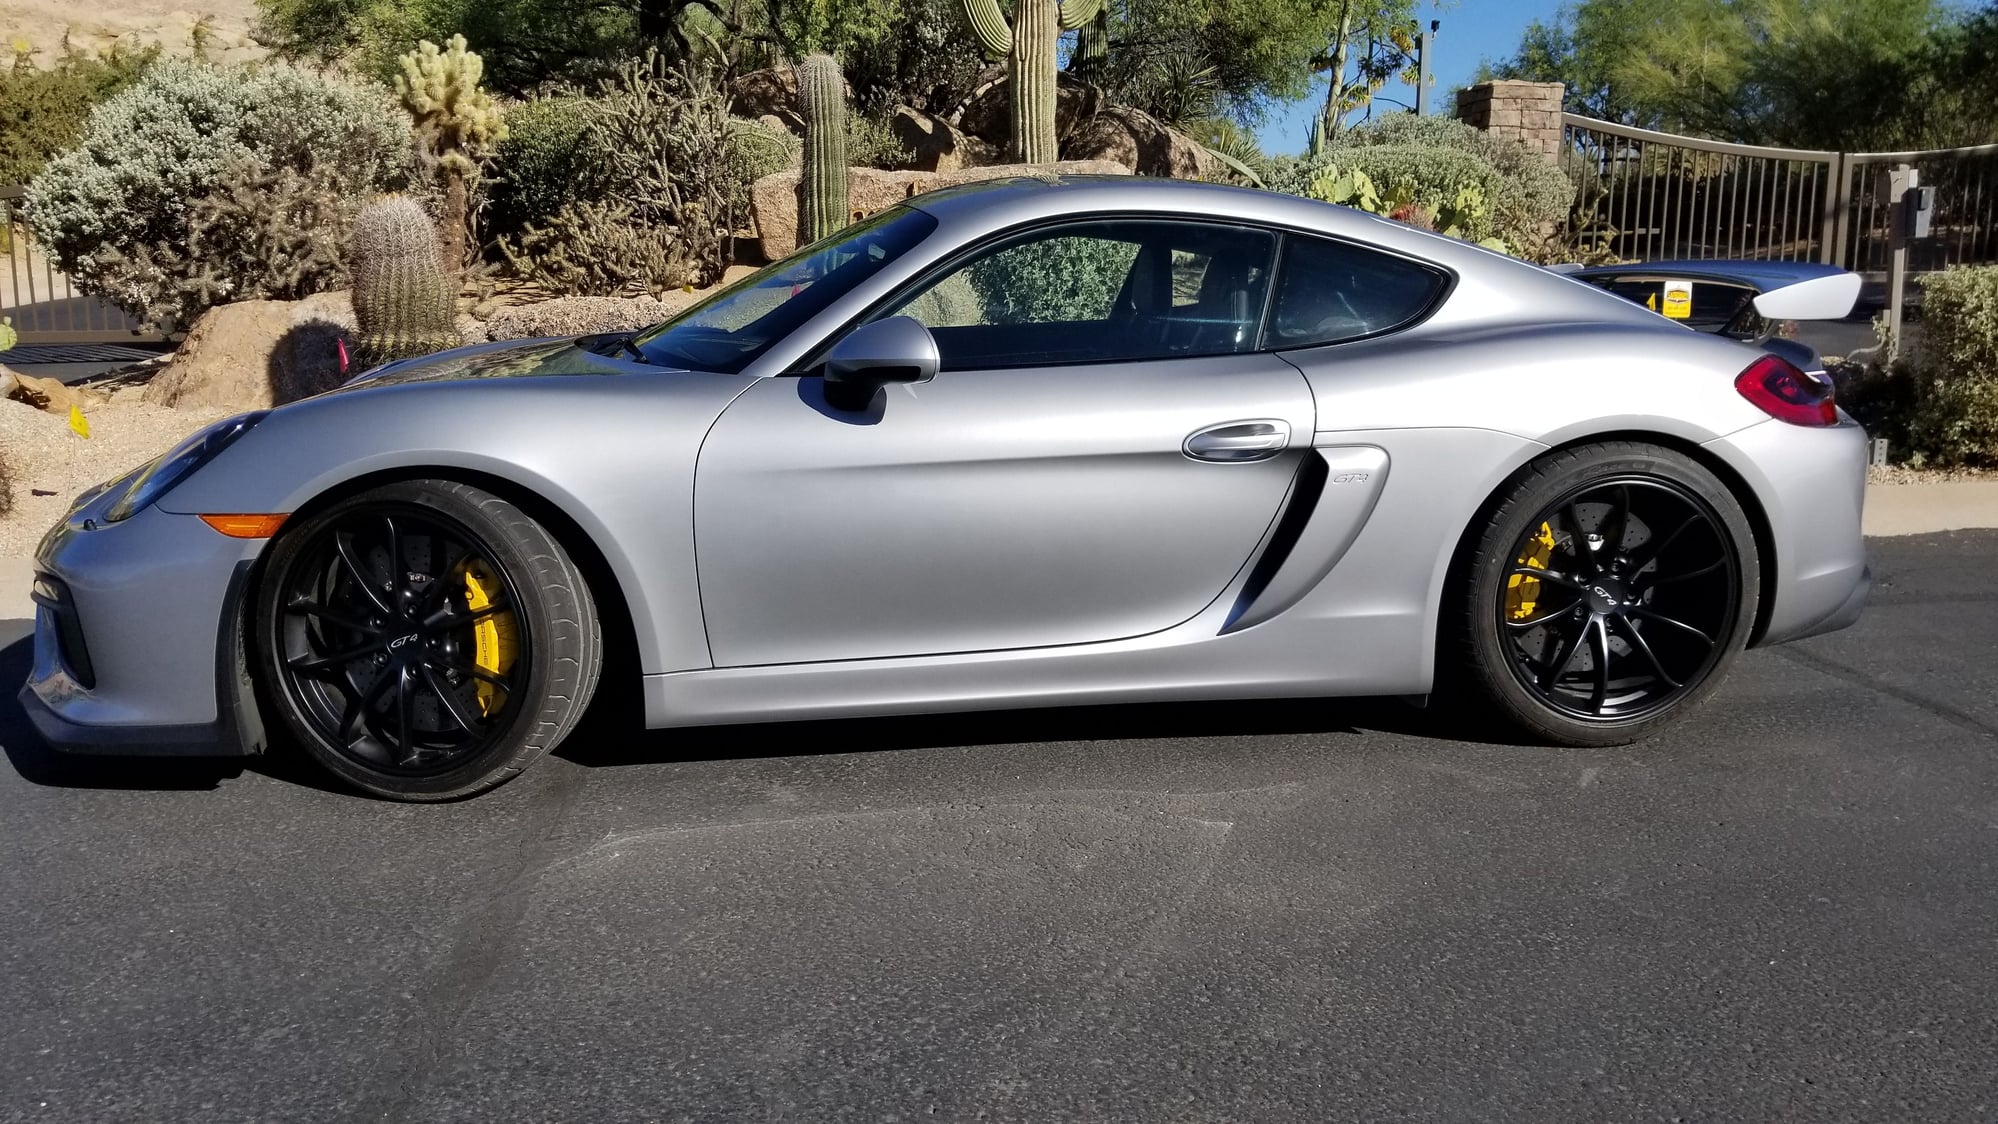 2016 Porsche Cayman GT4 -  - Used - VIN WP0AC2A88GK196220 - 2,765 Miles - 6 cyl - 2WD - Manual - Silver - Chandler, AZ 85224, United States